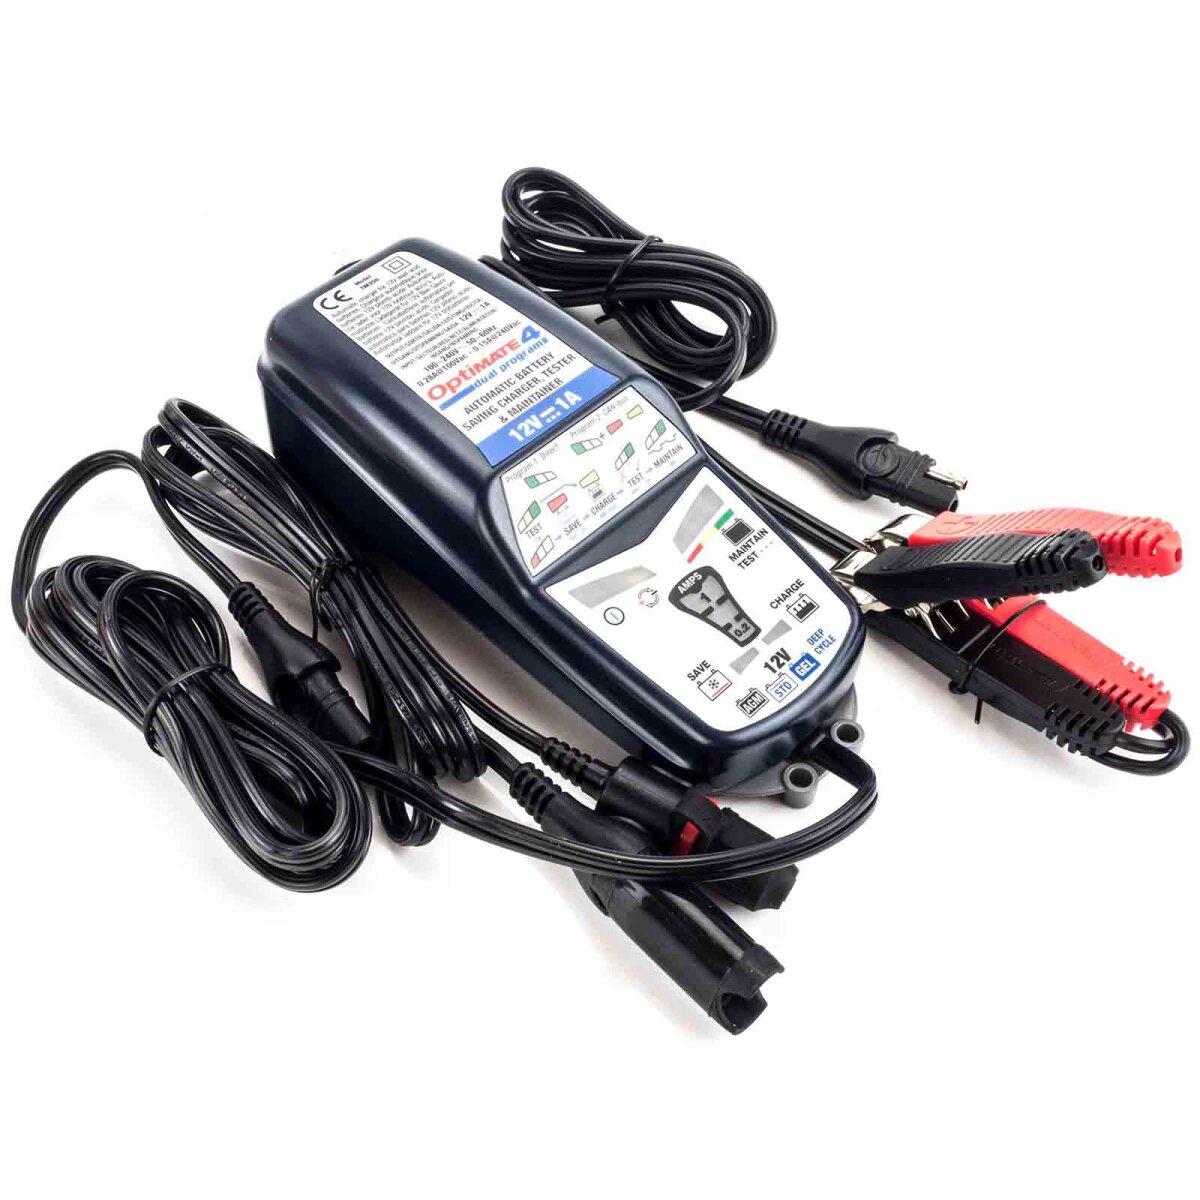 Original BMW motorcycle battery charger plus 230V charger - NEW VERSION